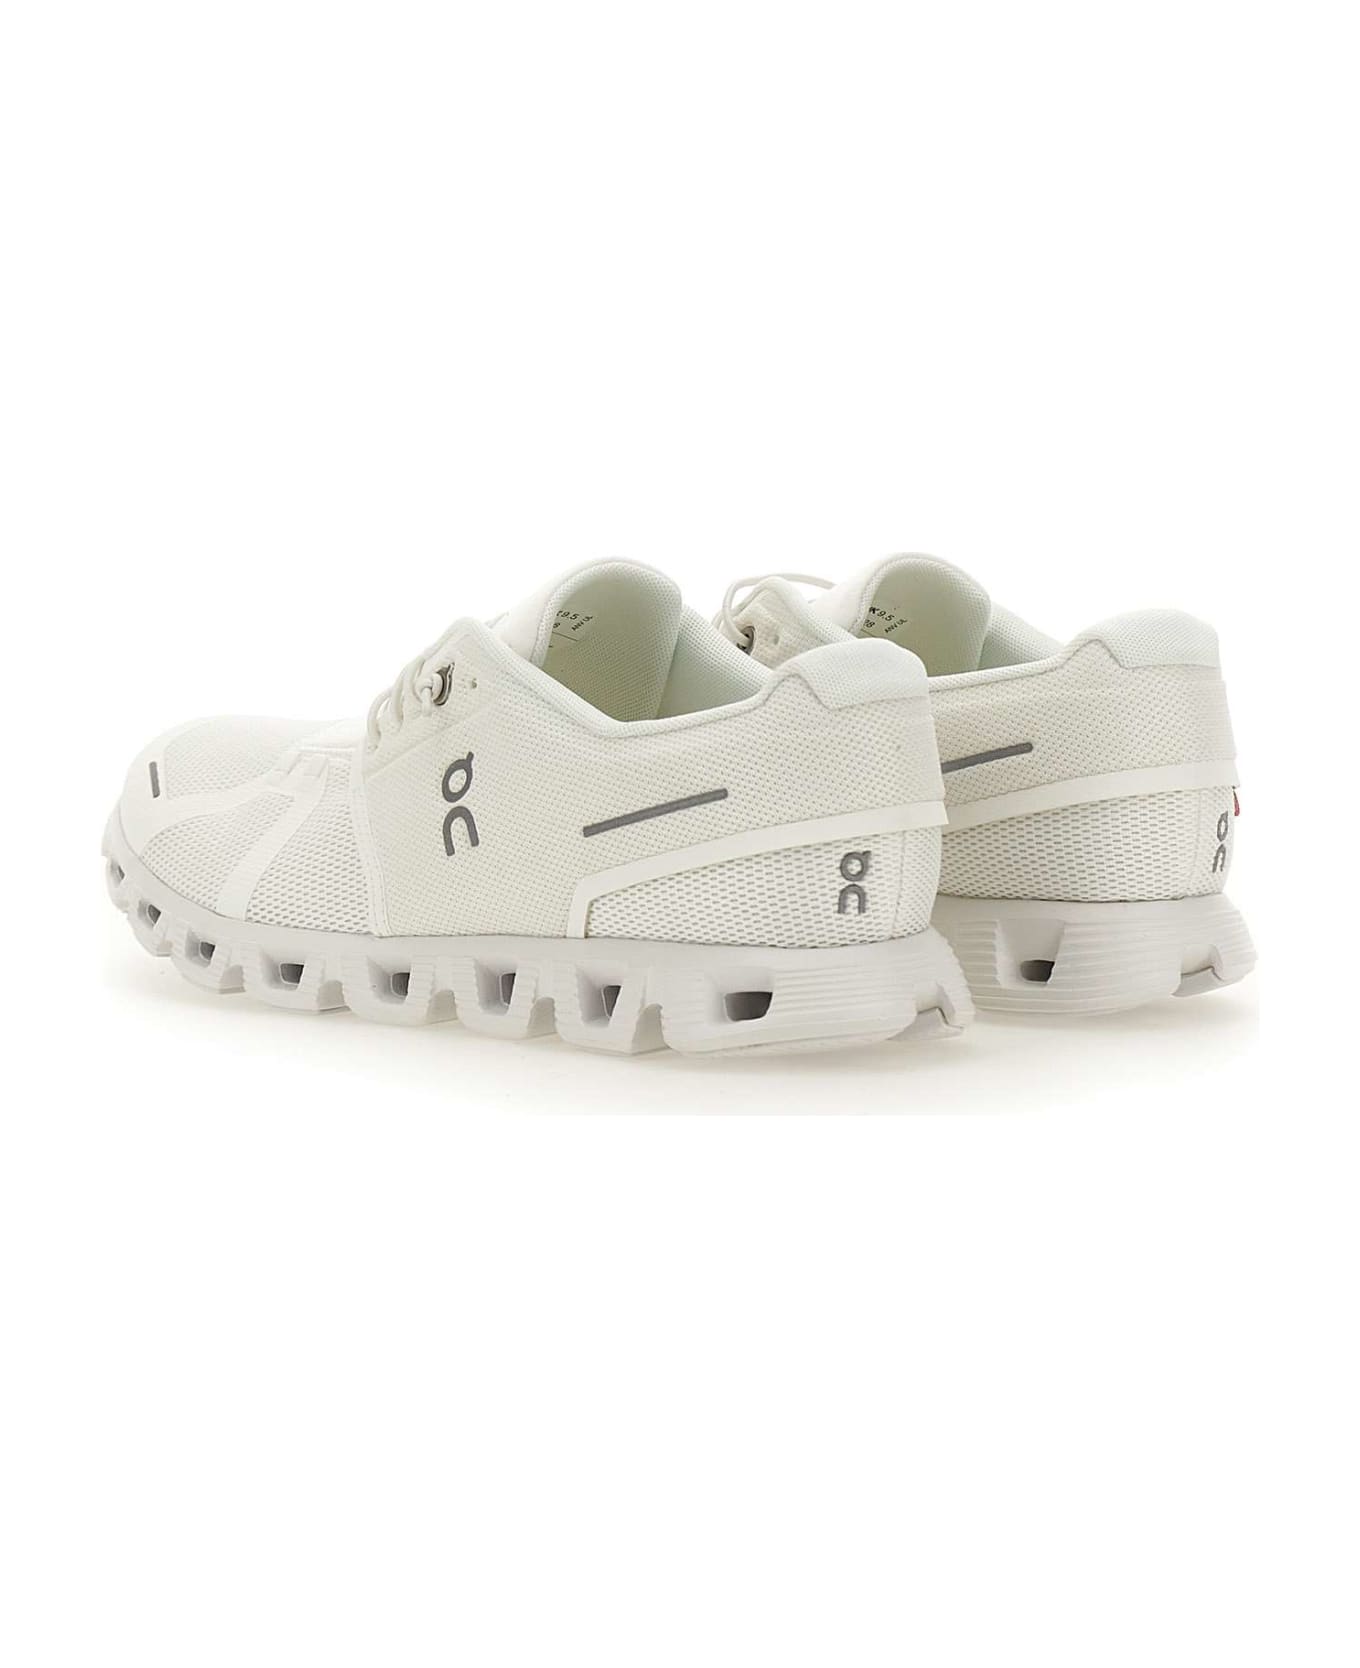 ON "cloud 5" Sneakers - WHITE